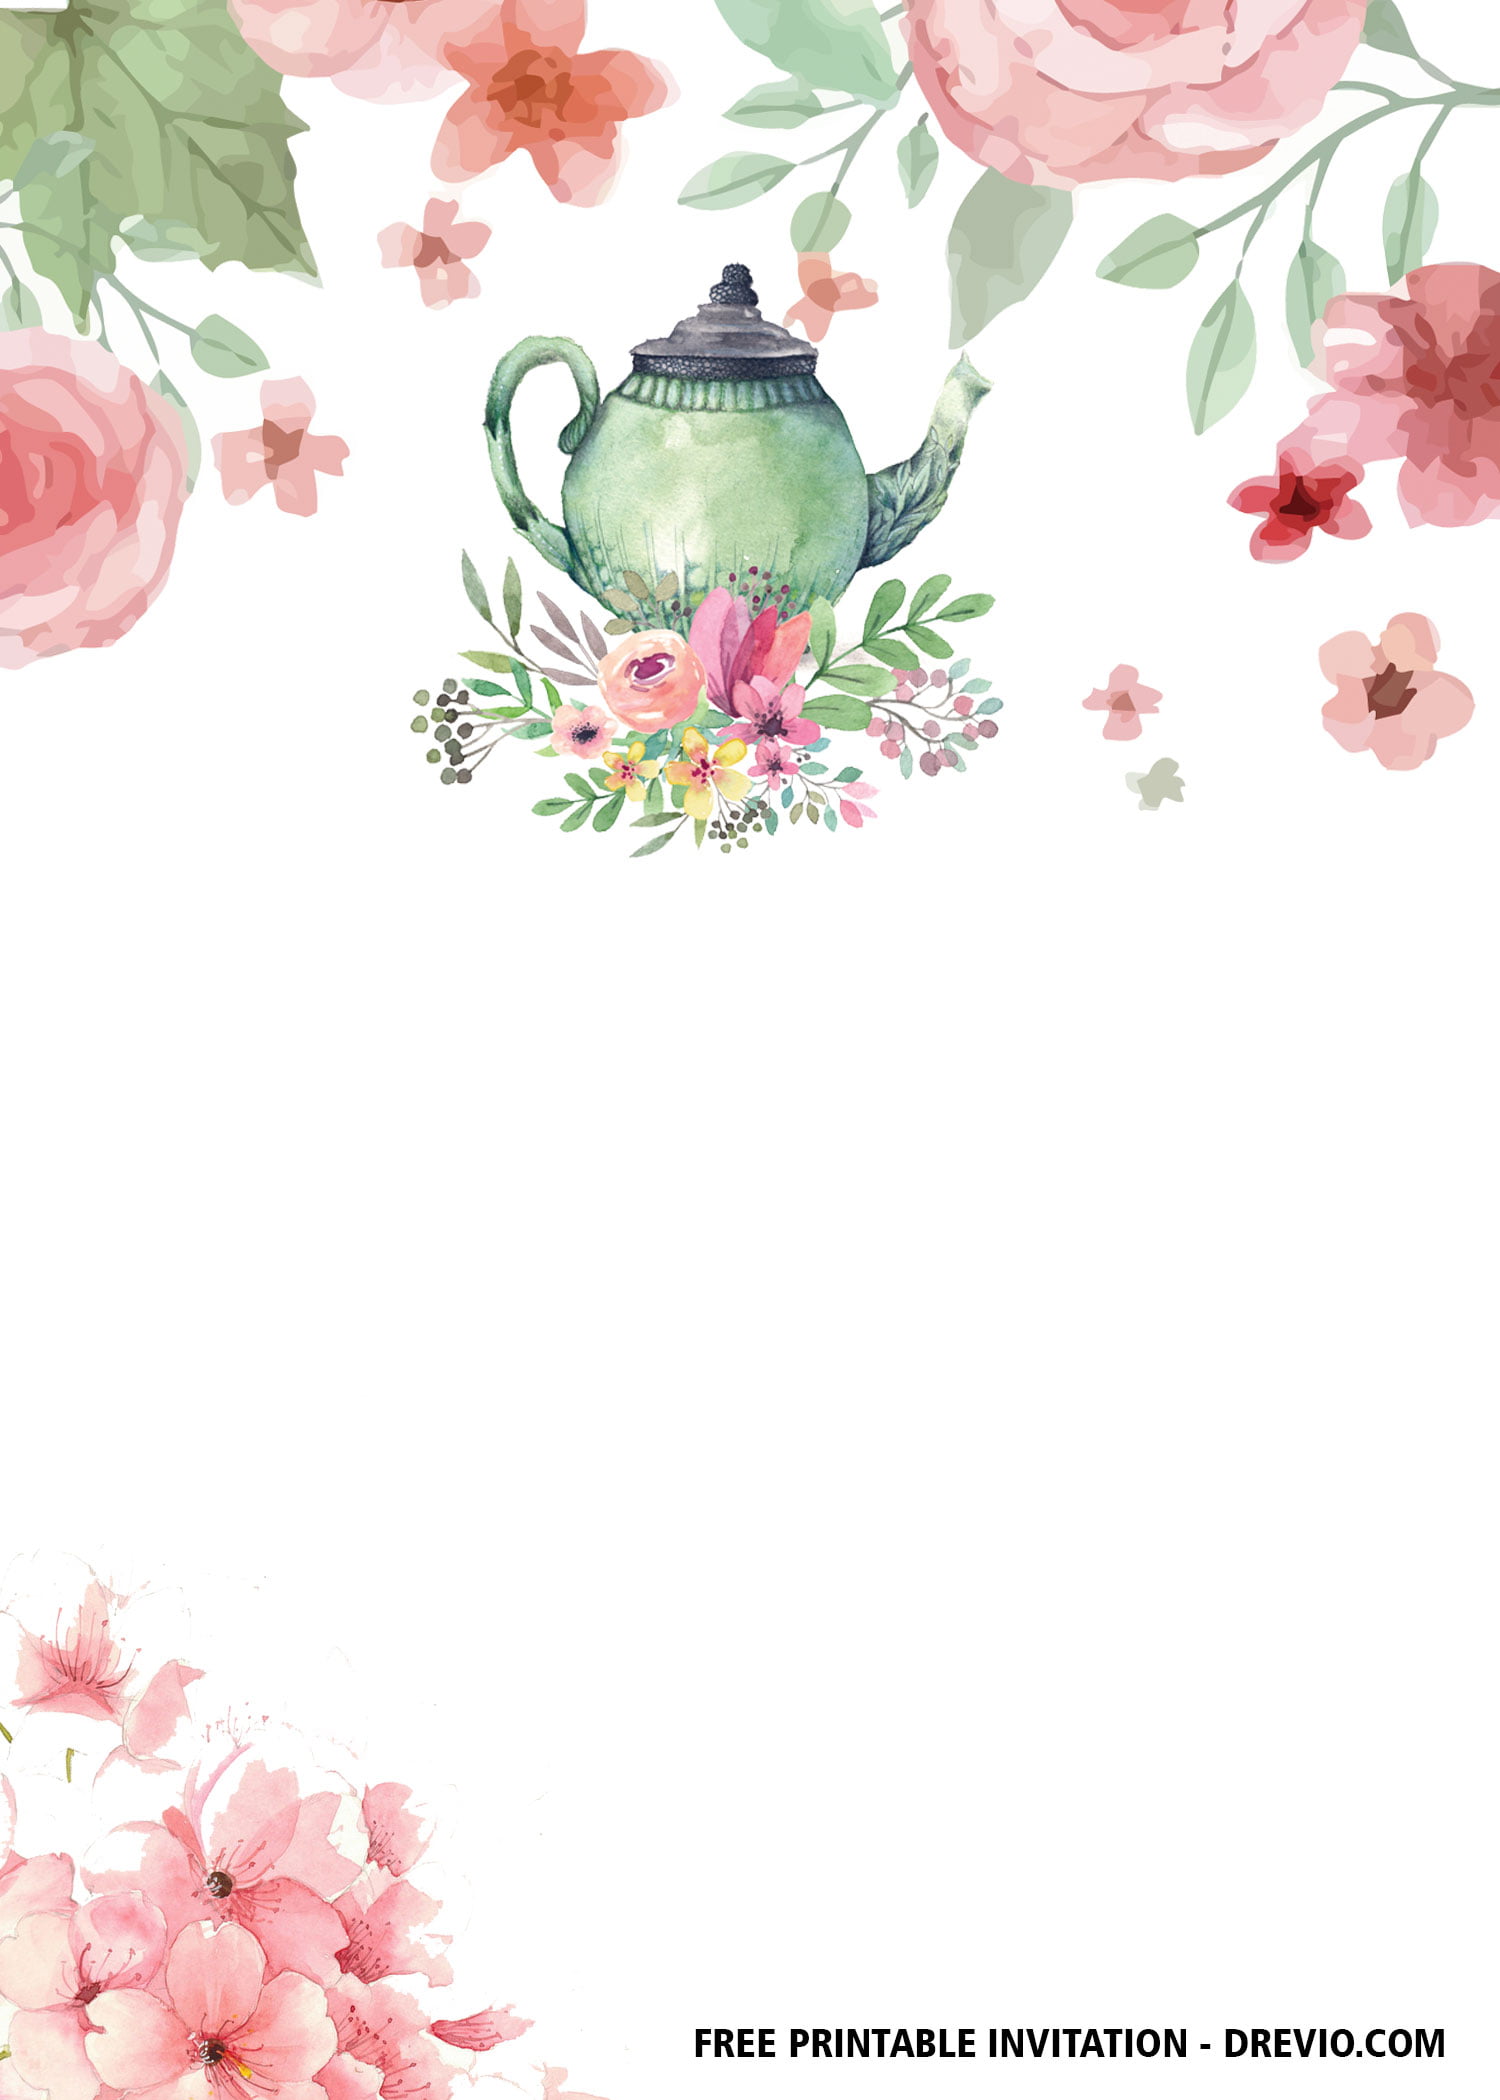 FREE Floral Tea Party Invitation Templates Download Hundreds FREE